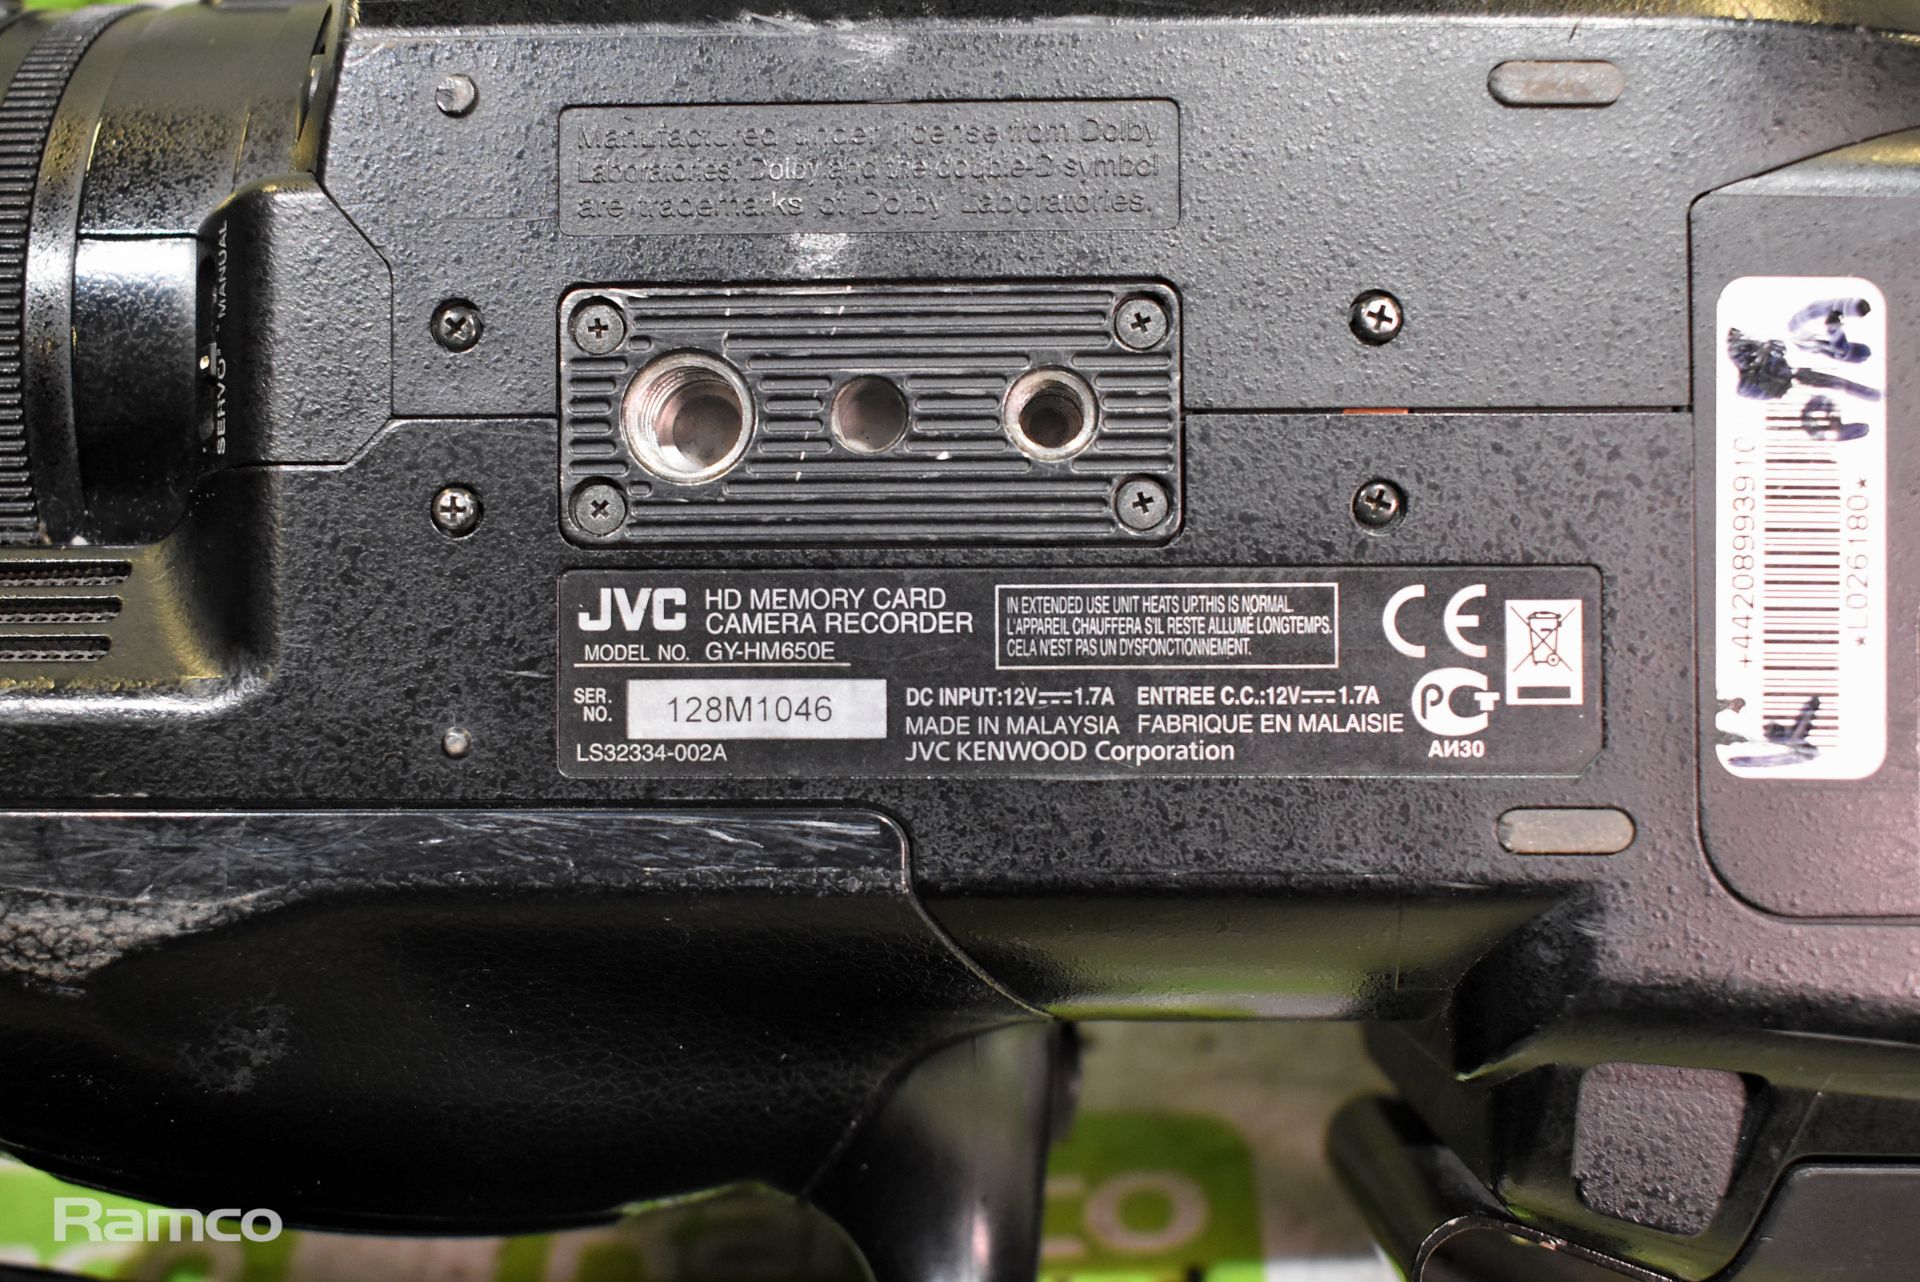 JVC GY-HM650E HD memory card camera recorder, Sony PMW-500 HD-XDCAM camcorder body - SPARES/REPAIRS - Image 12 of 21